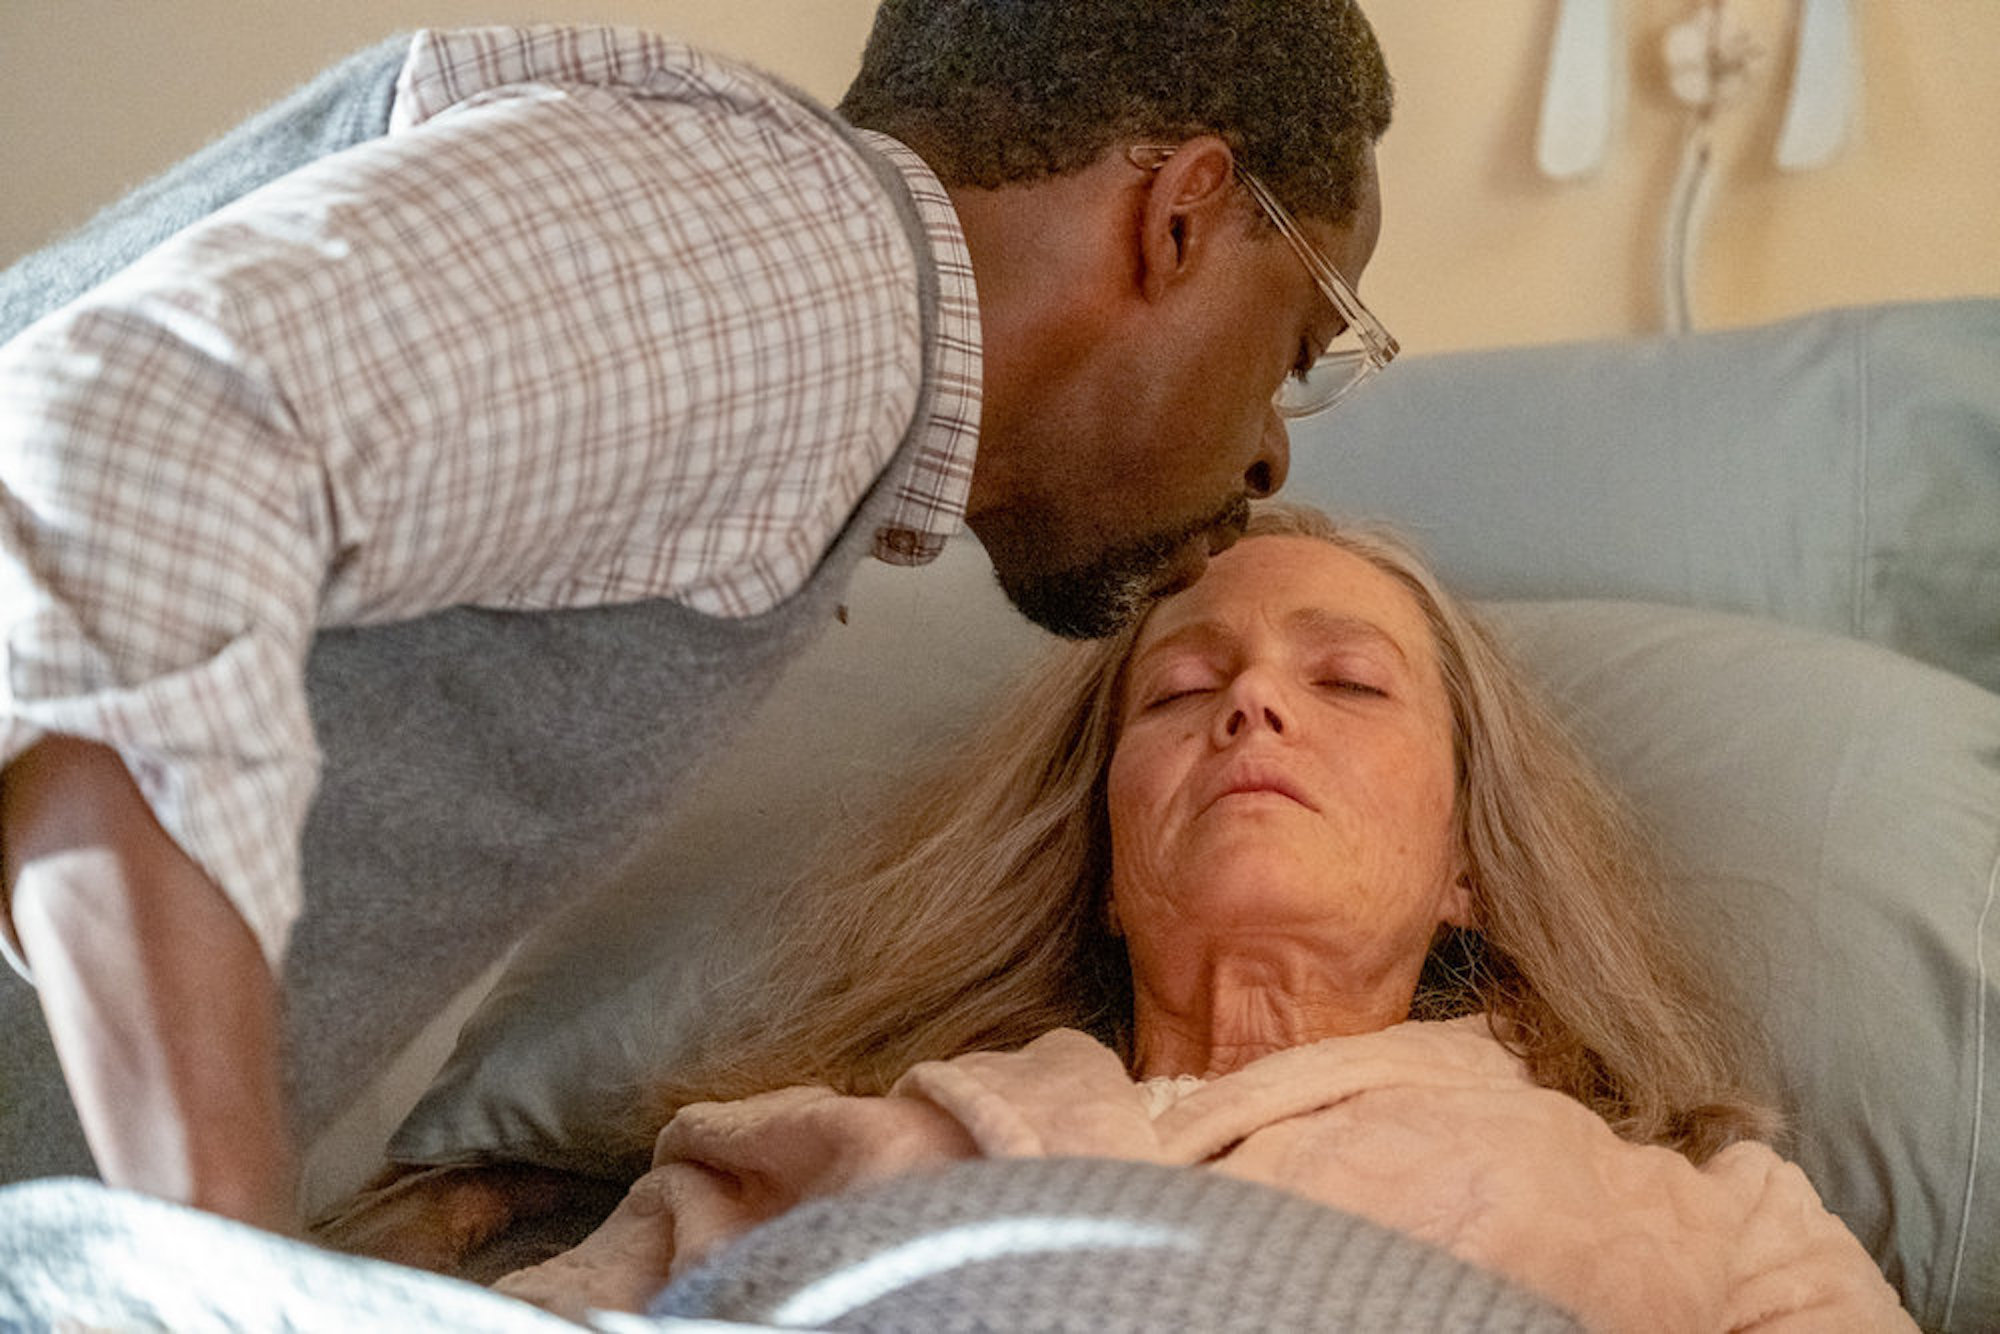 Randall kissing Rebecca's forehead in 'This Is Us' Season 6 Episode 17, 'The Train'